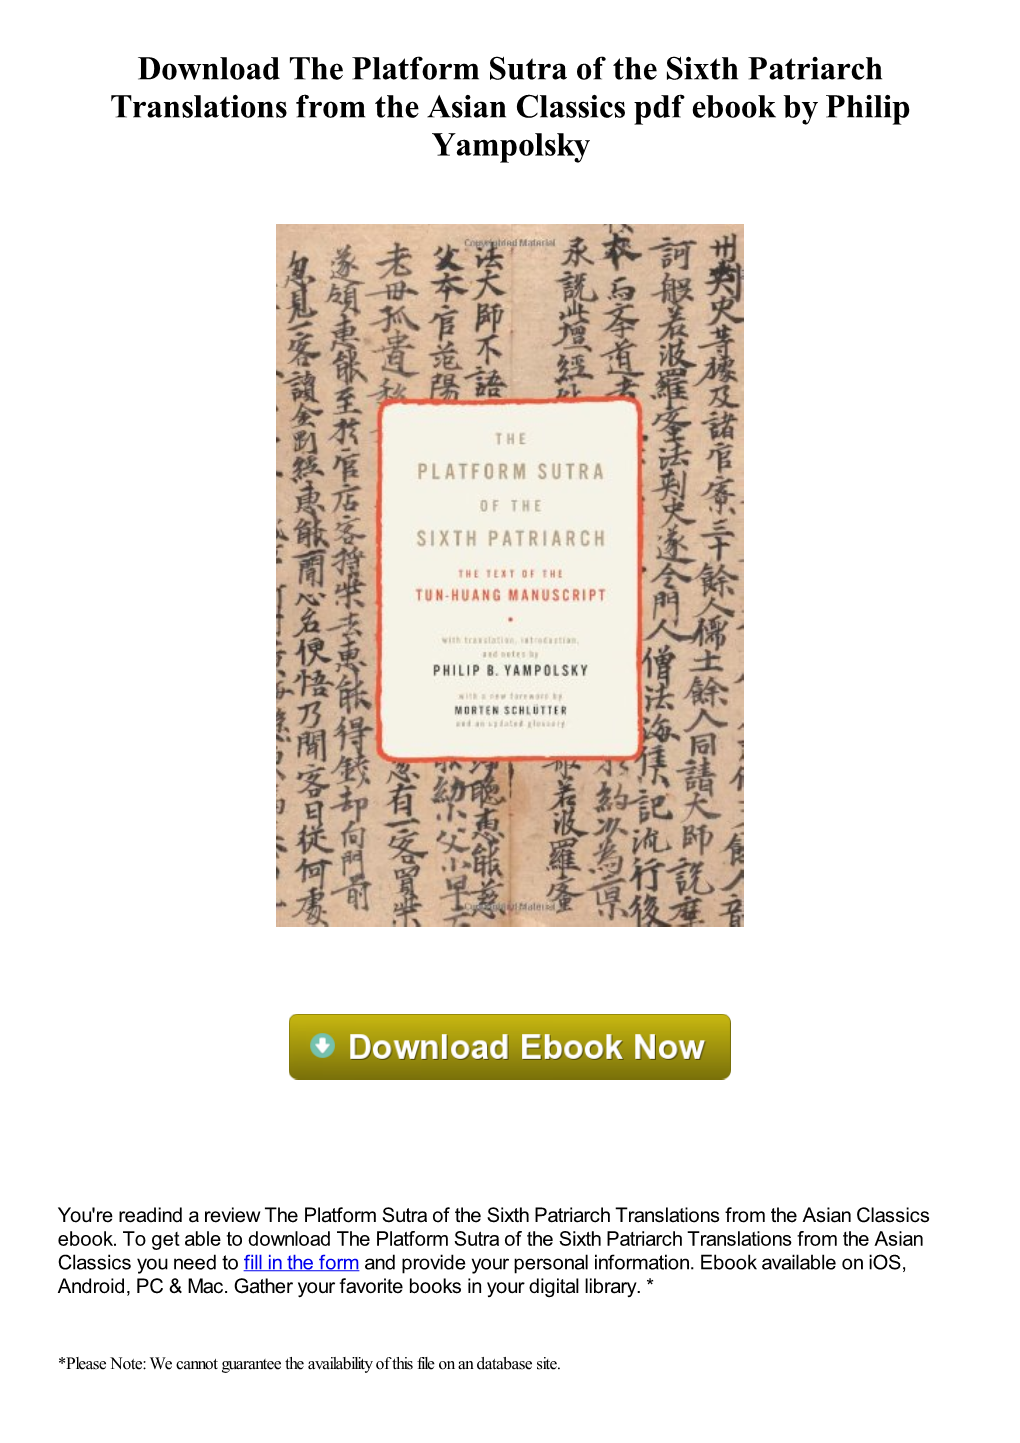 Download the Platform Sutra of the Sixth Patriarch Translations from the Asian Classics Pdf Ebook by Philip Yampolsky